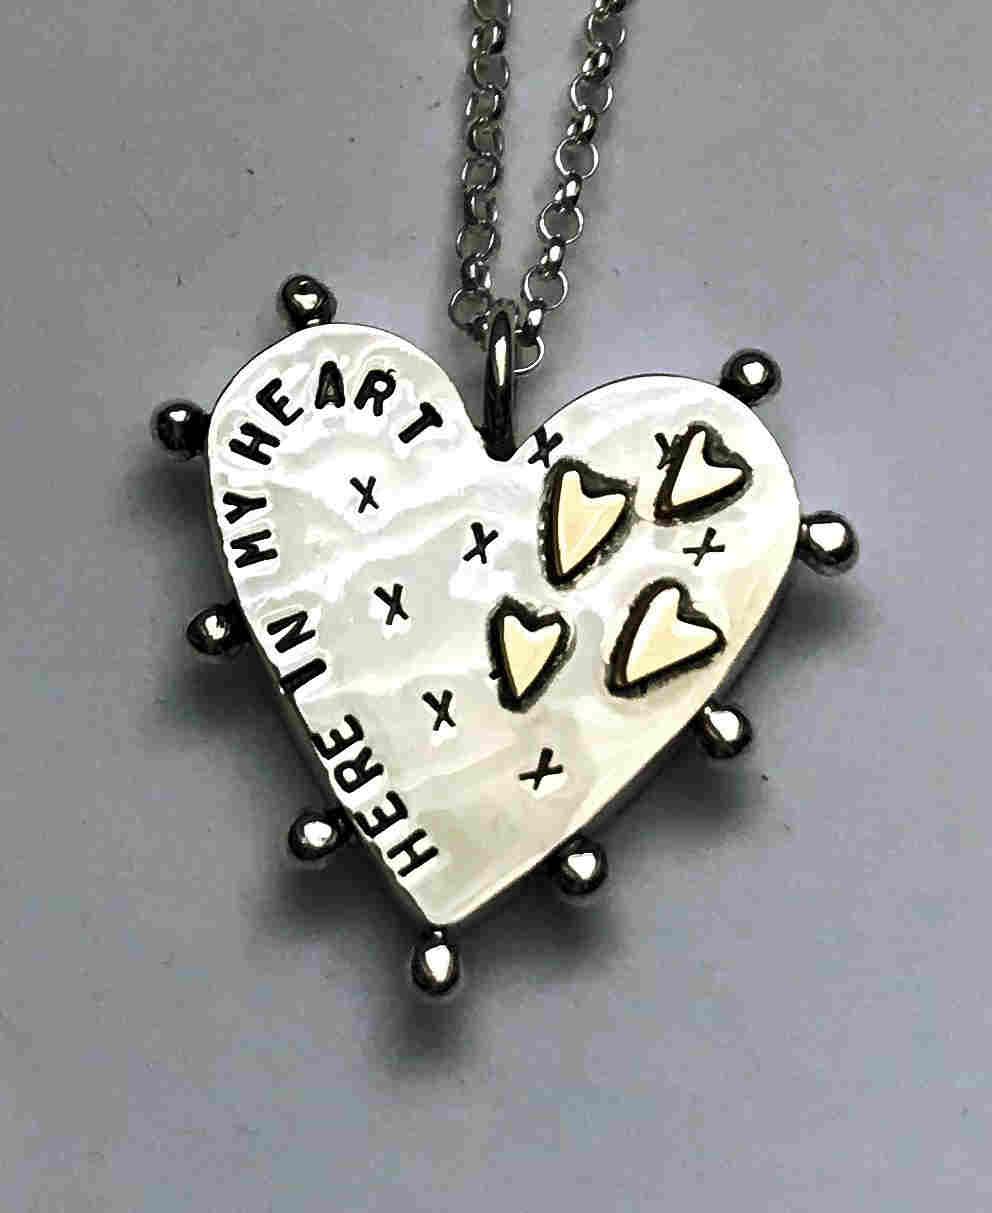 'Sterling Silver Box Heart Necklace HERE IN MY HEART with 4 9ct gold hearts: size 5' by artist Carol Docherty